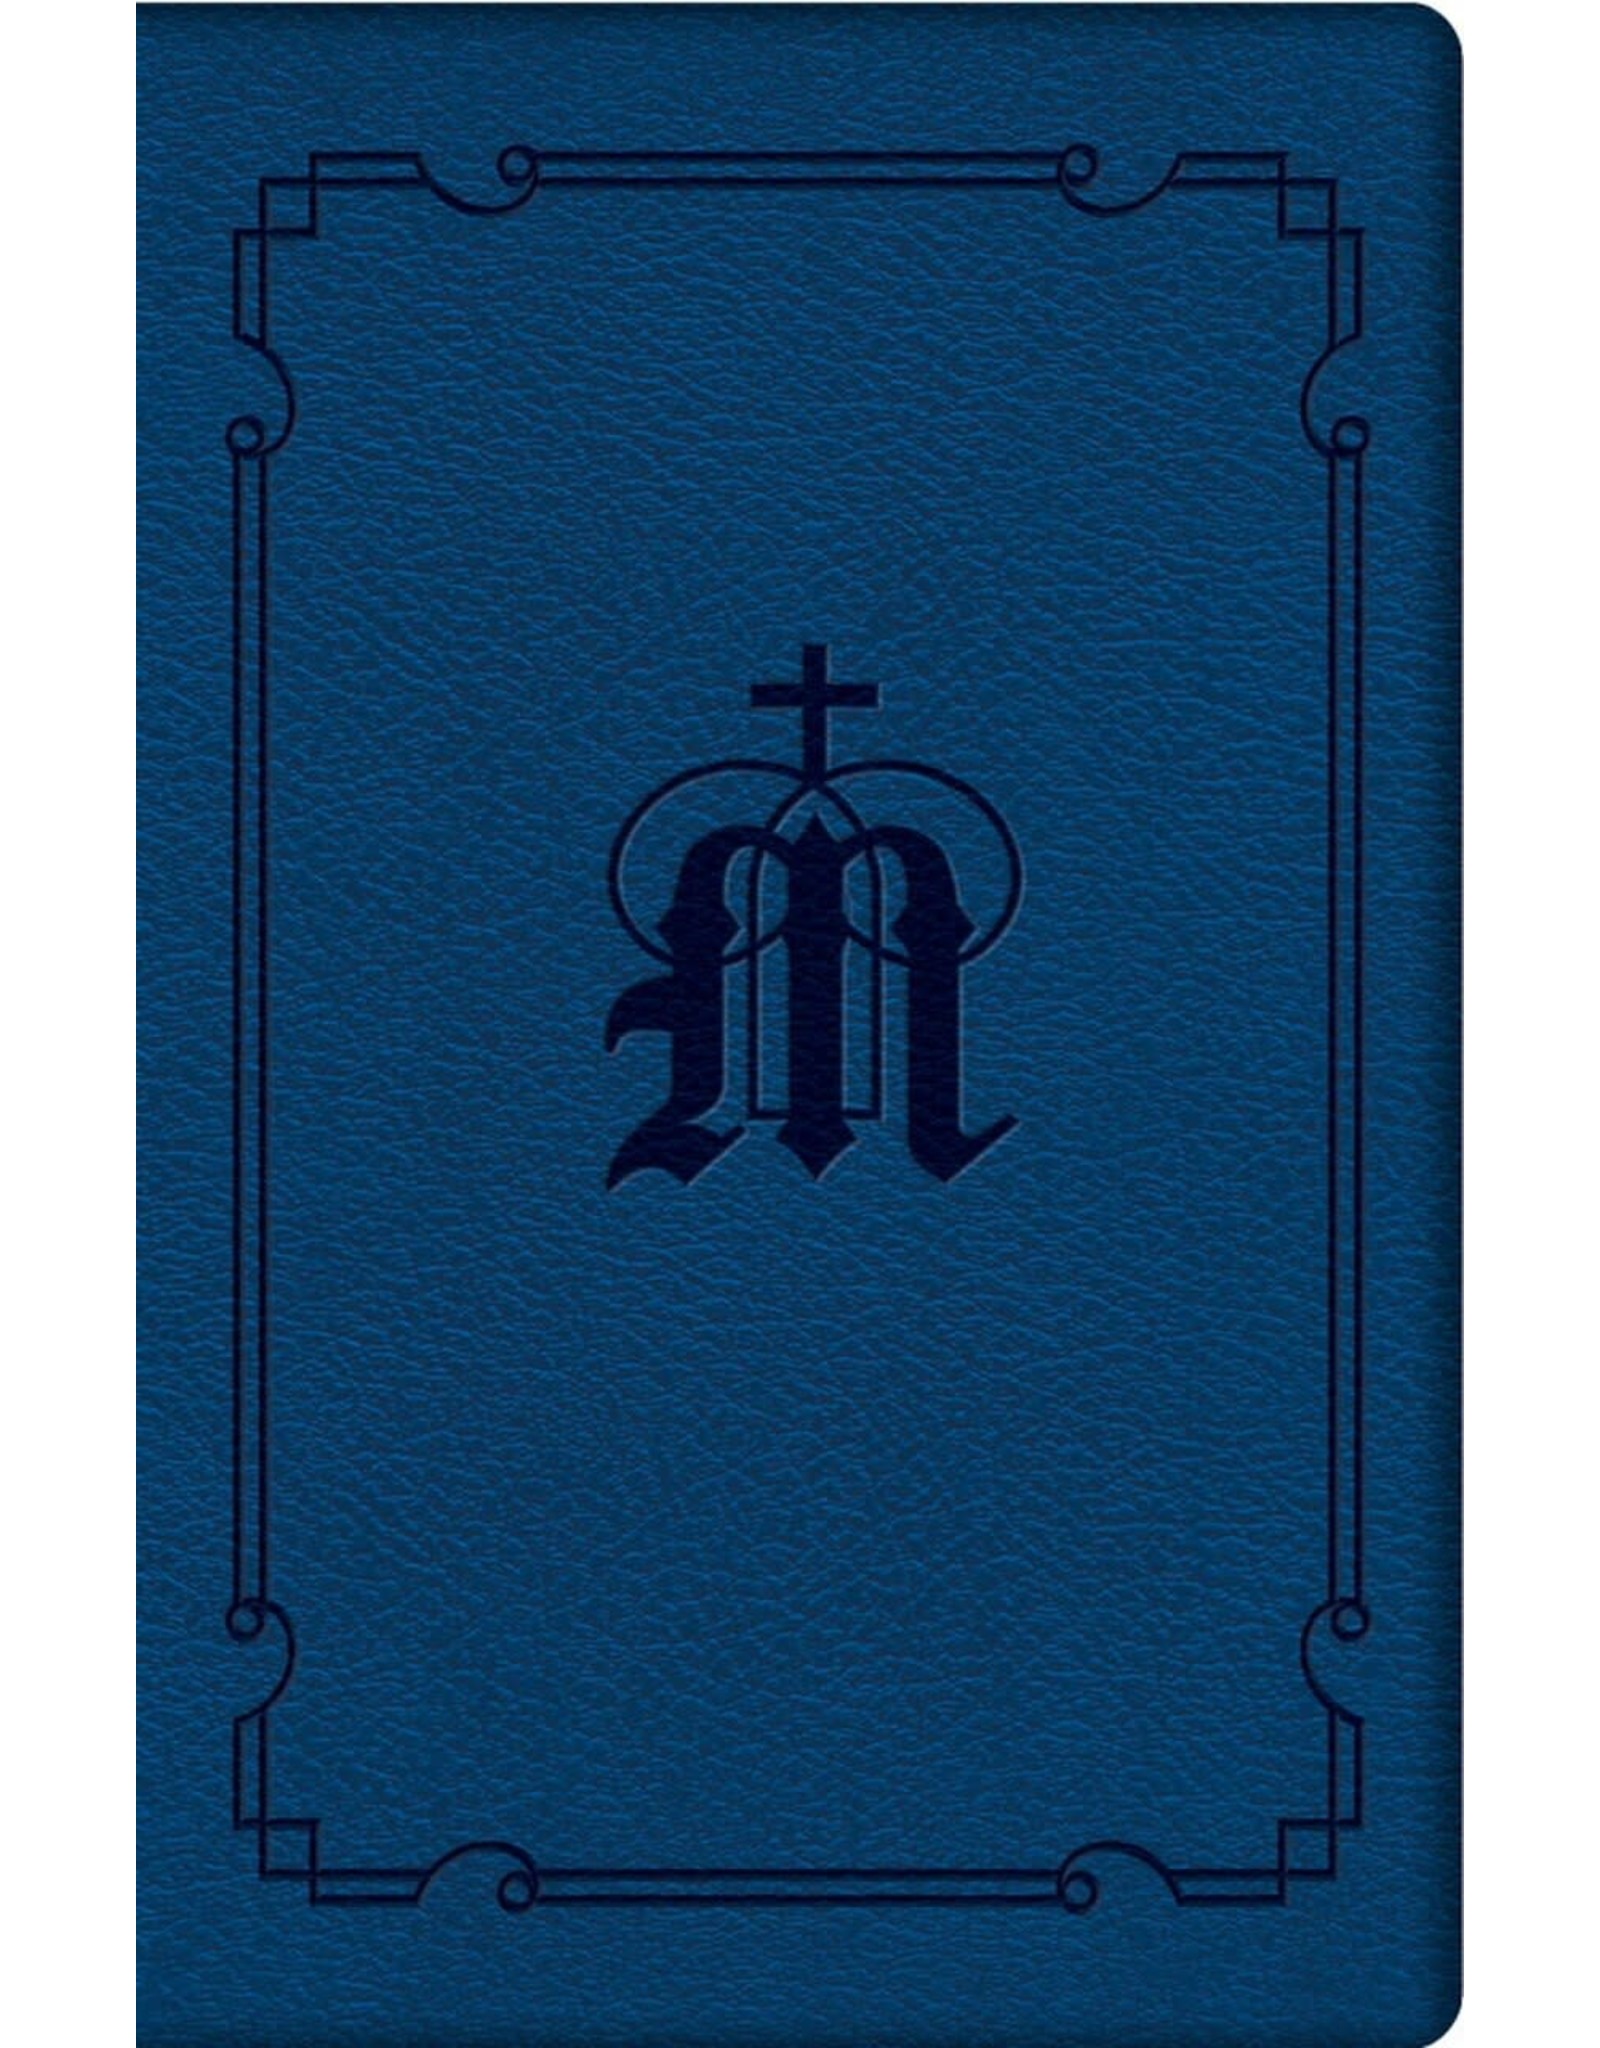 Tan Books Manual For Marian Devotion by The Dominican Sisters Of Mary (